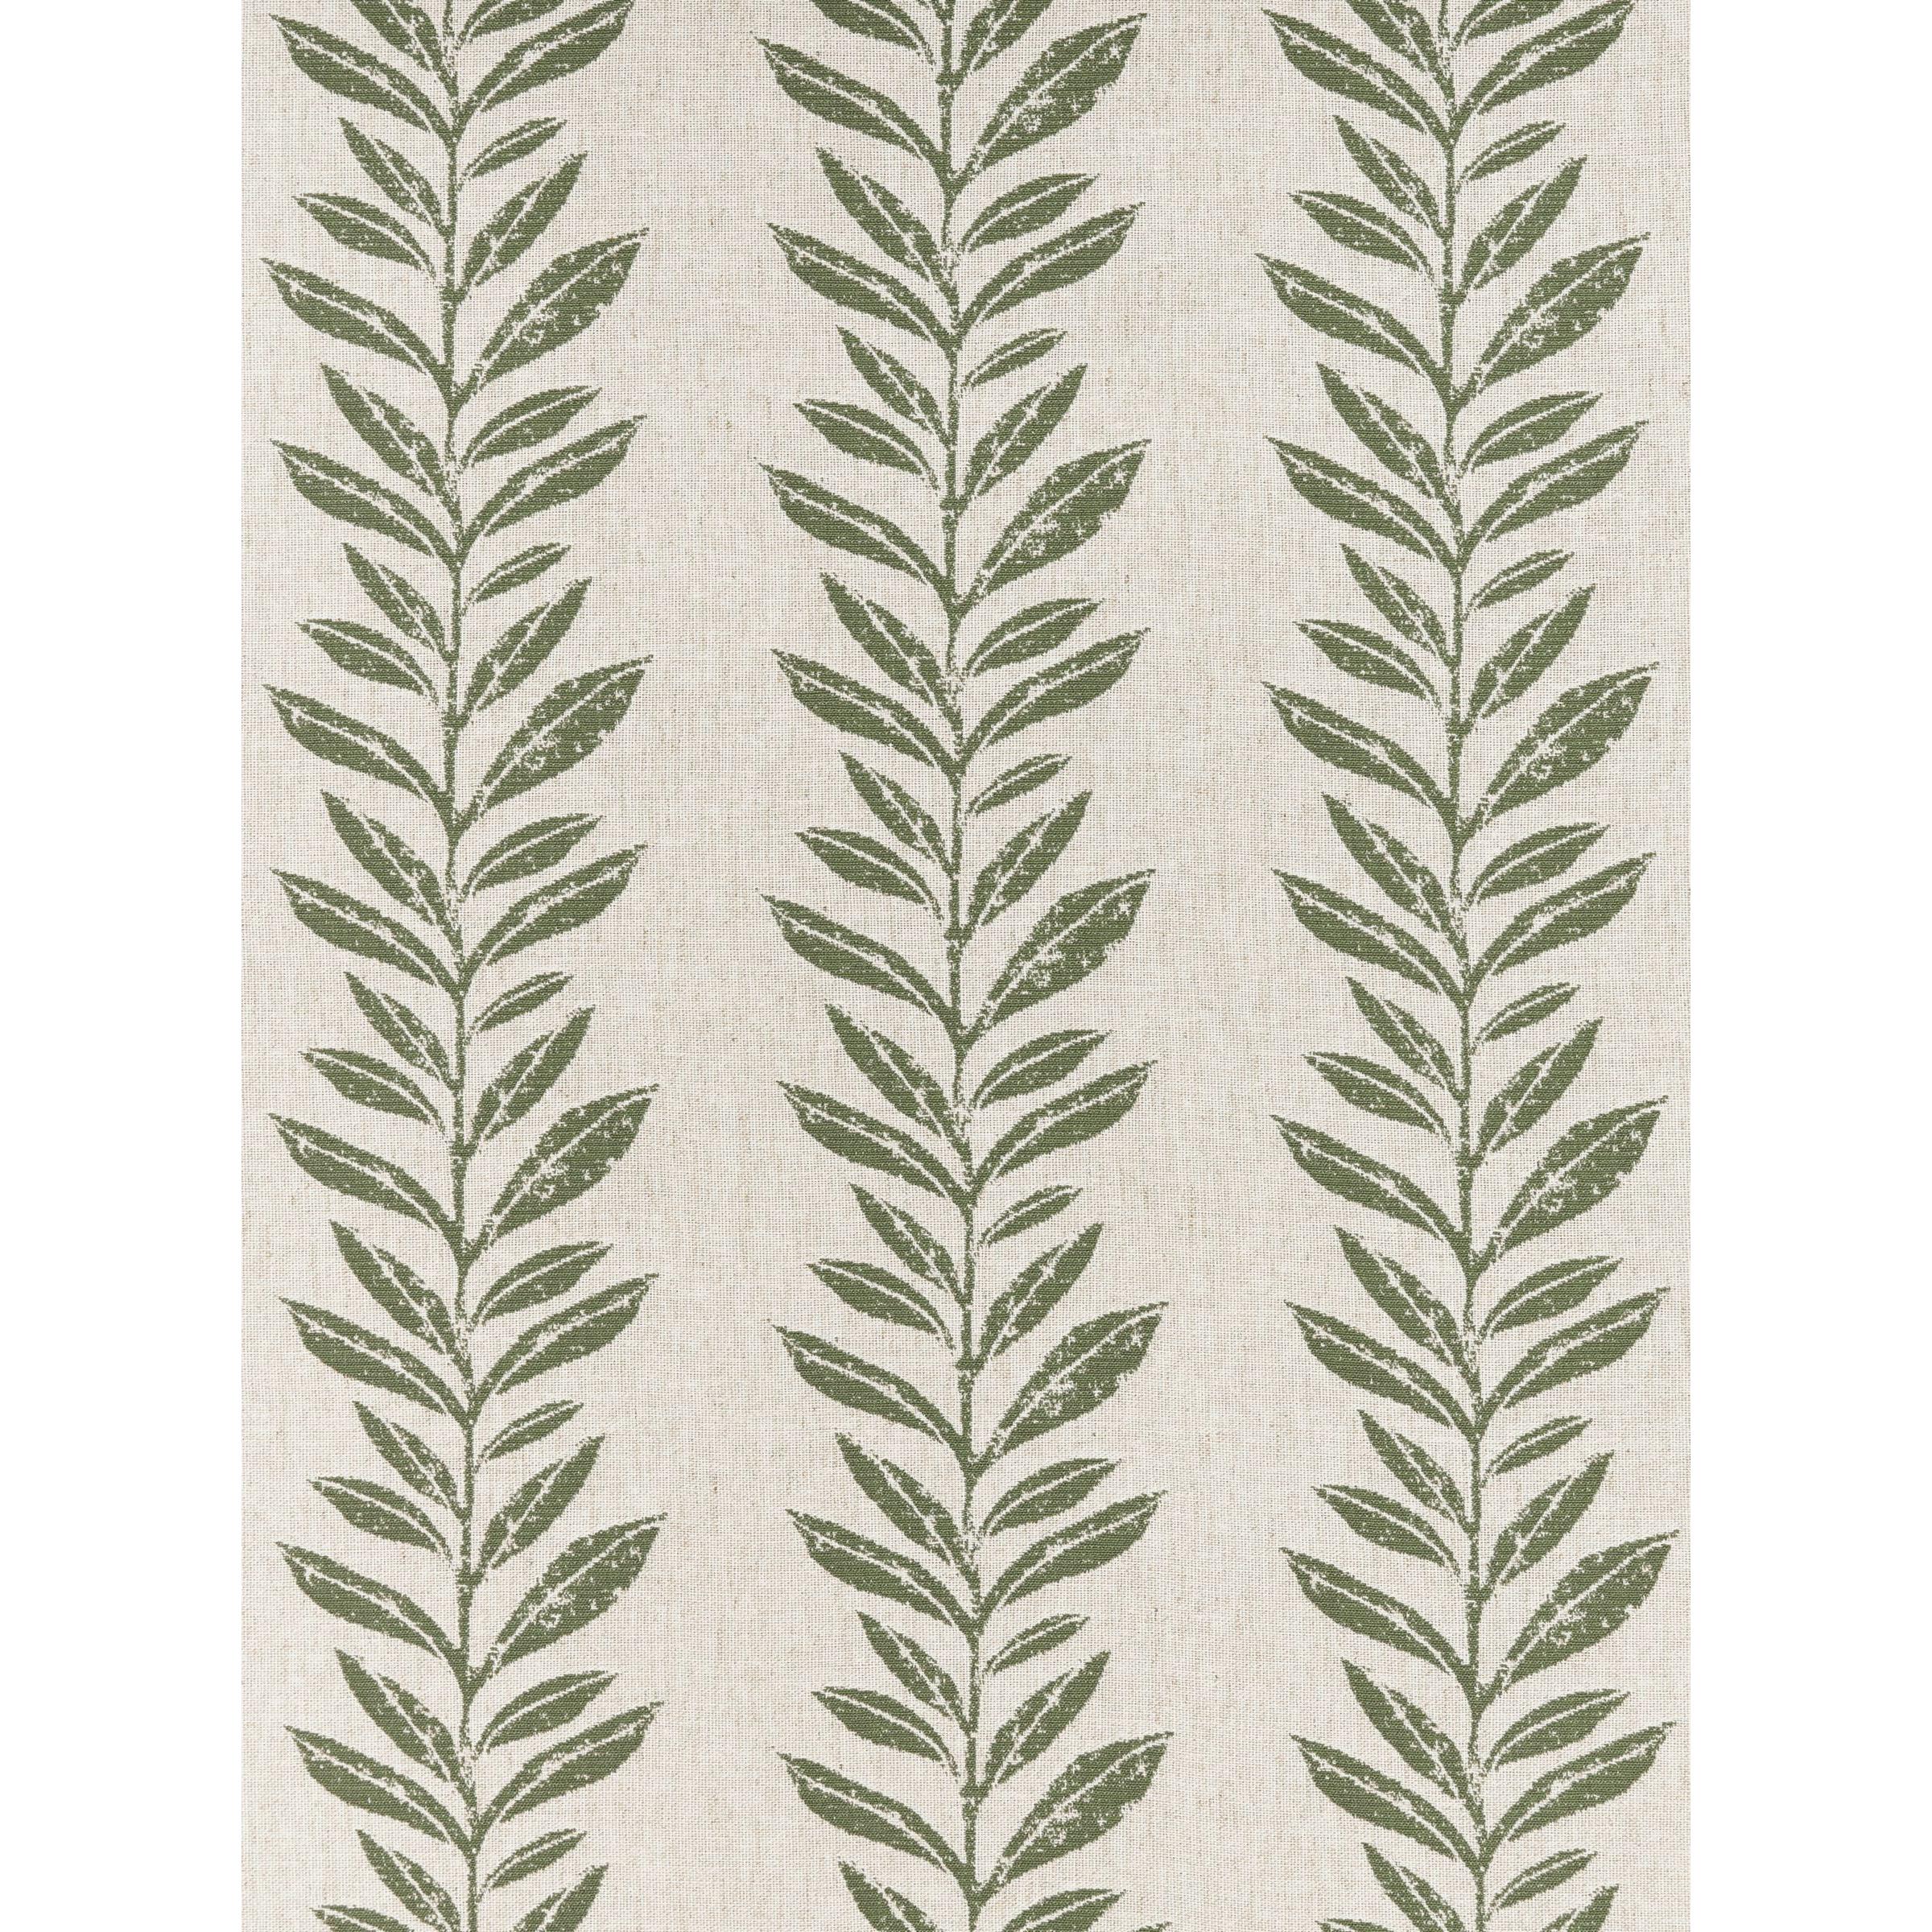 John Lewis Norah Made to Measure Curtains or Roman Blind, Myrtle Green - image 1